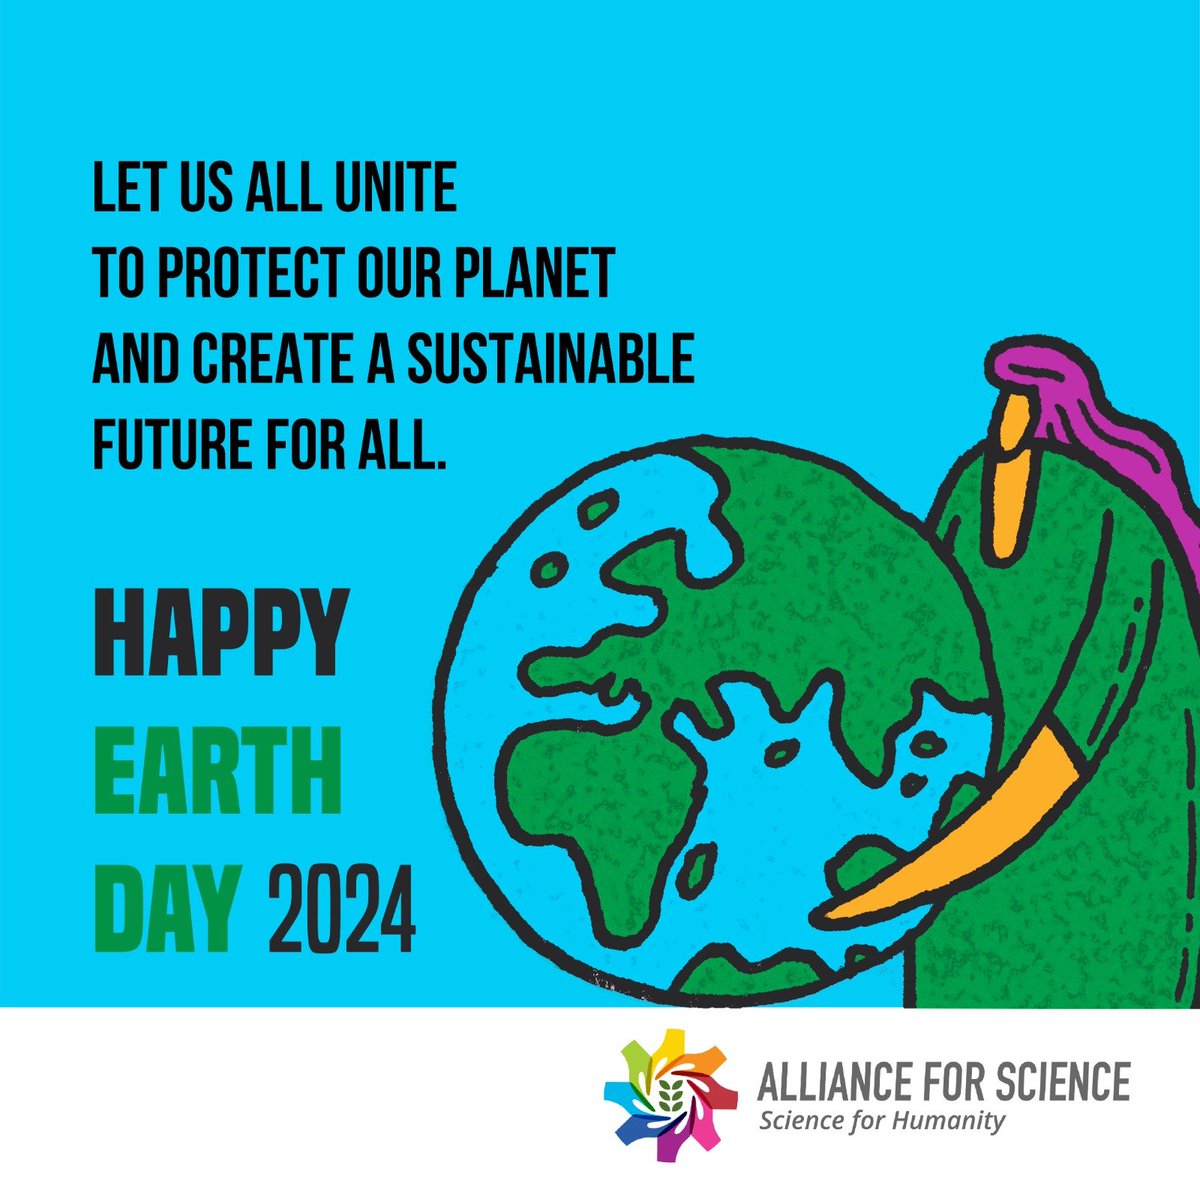 Let us all unite to protect our planet and create a sustainable future for all #EarthDay2024 #SustainableFuture